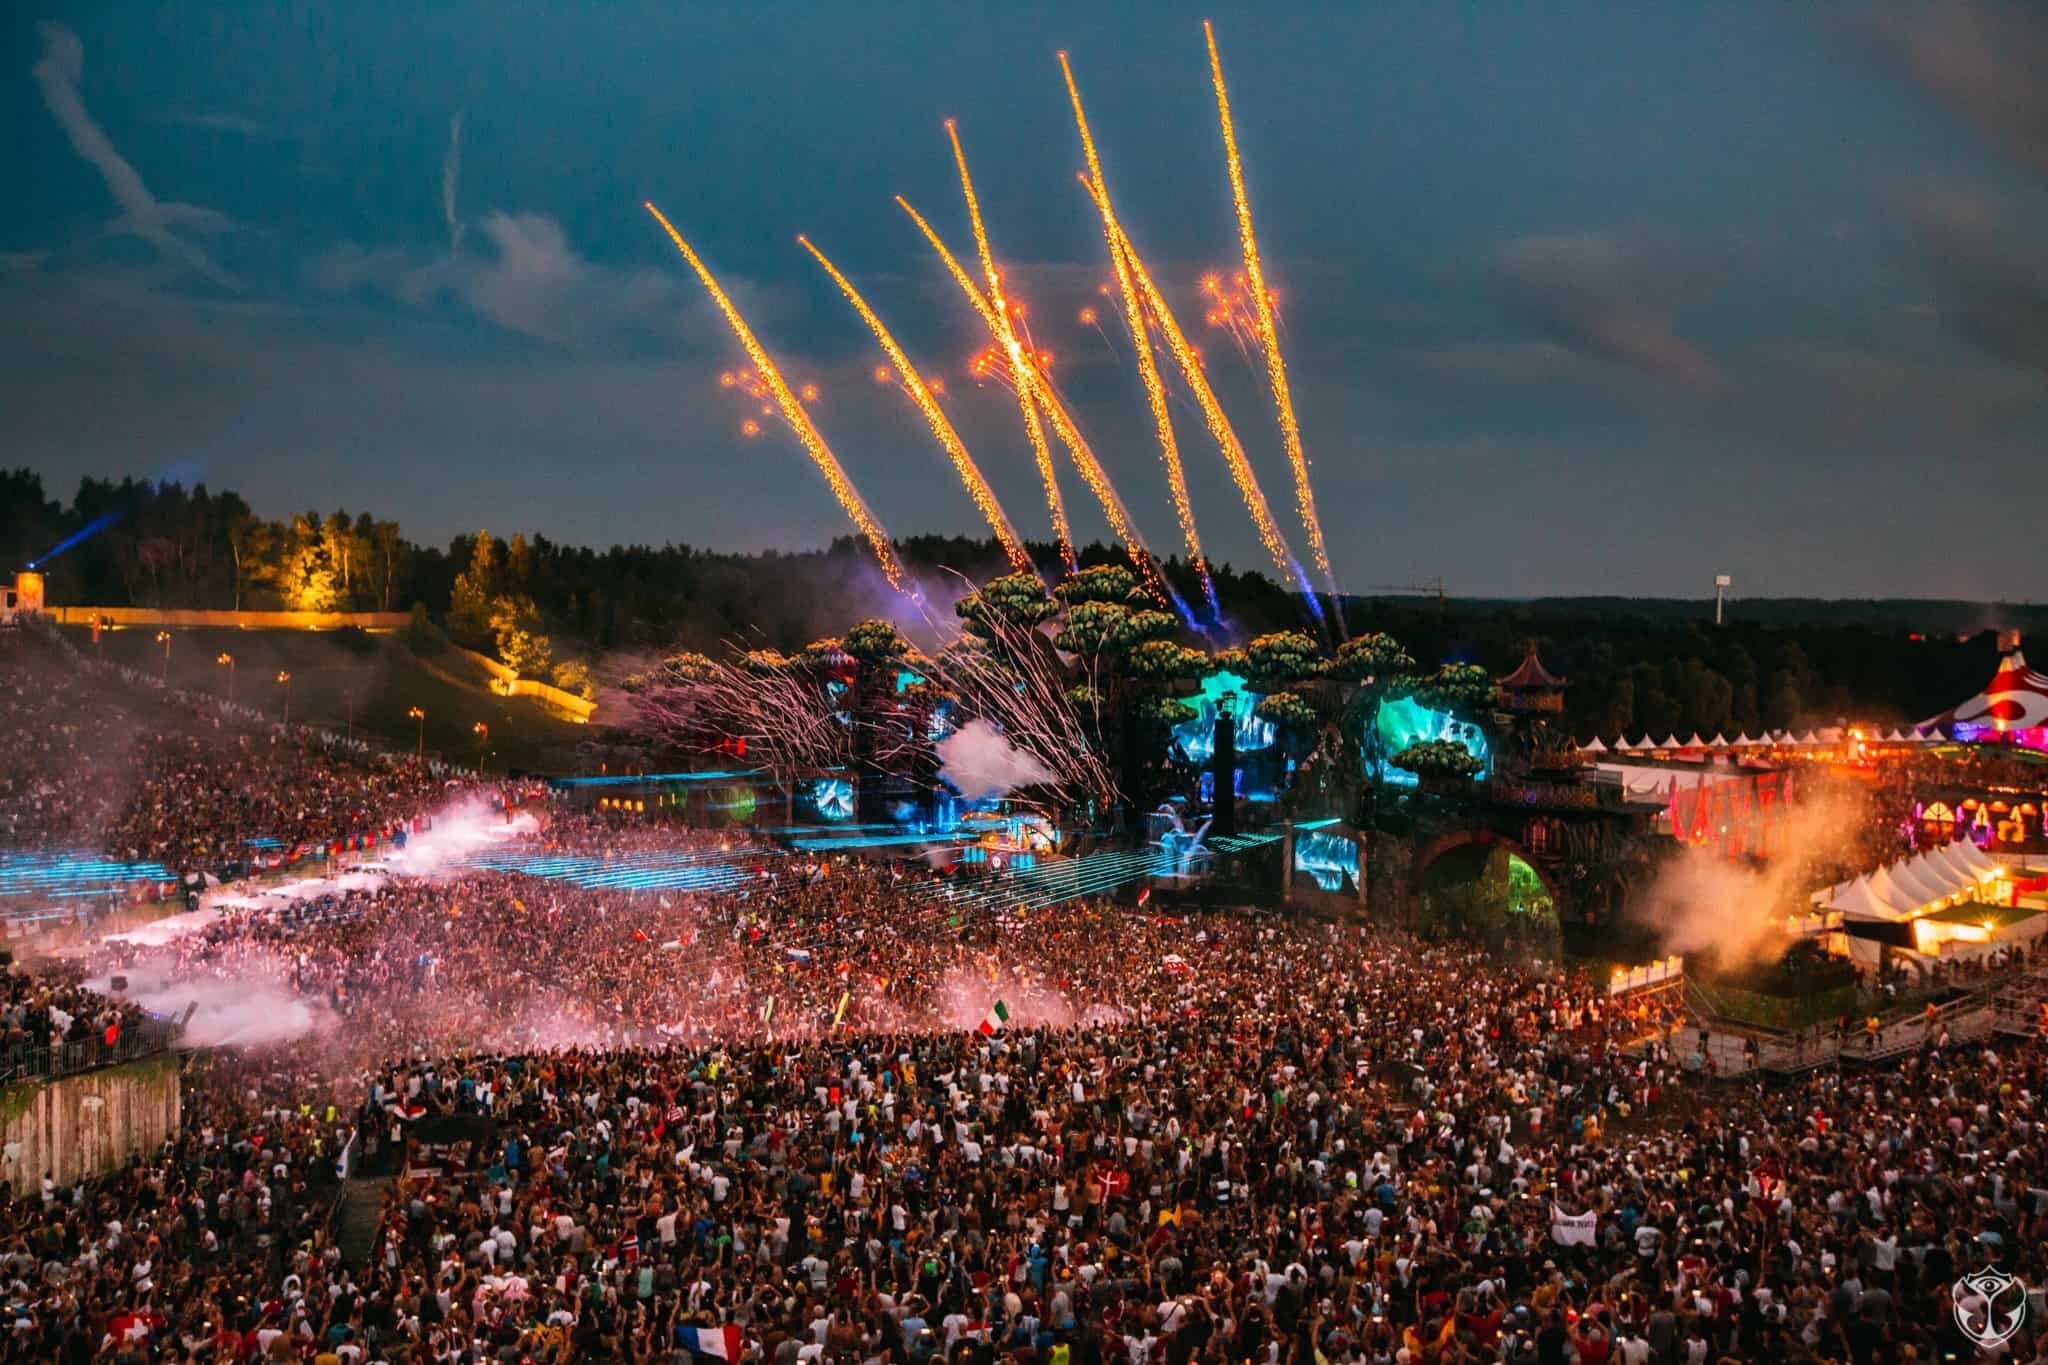 Rave Bucket List: 5 Amazing European Festivals to Experience Before You Die